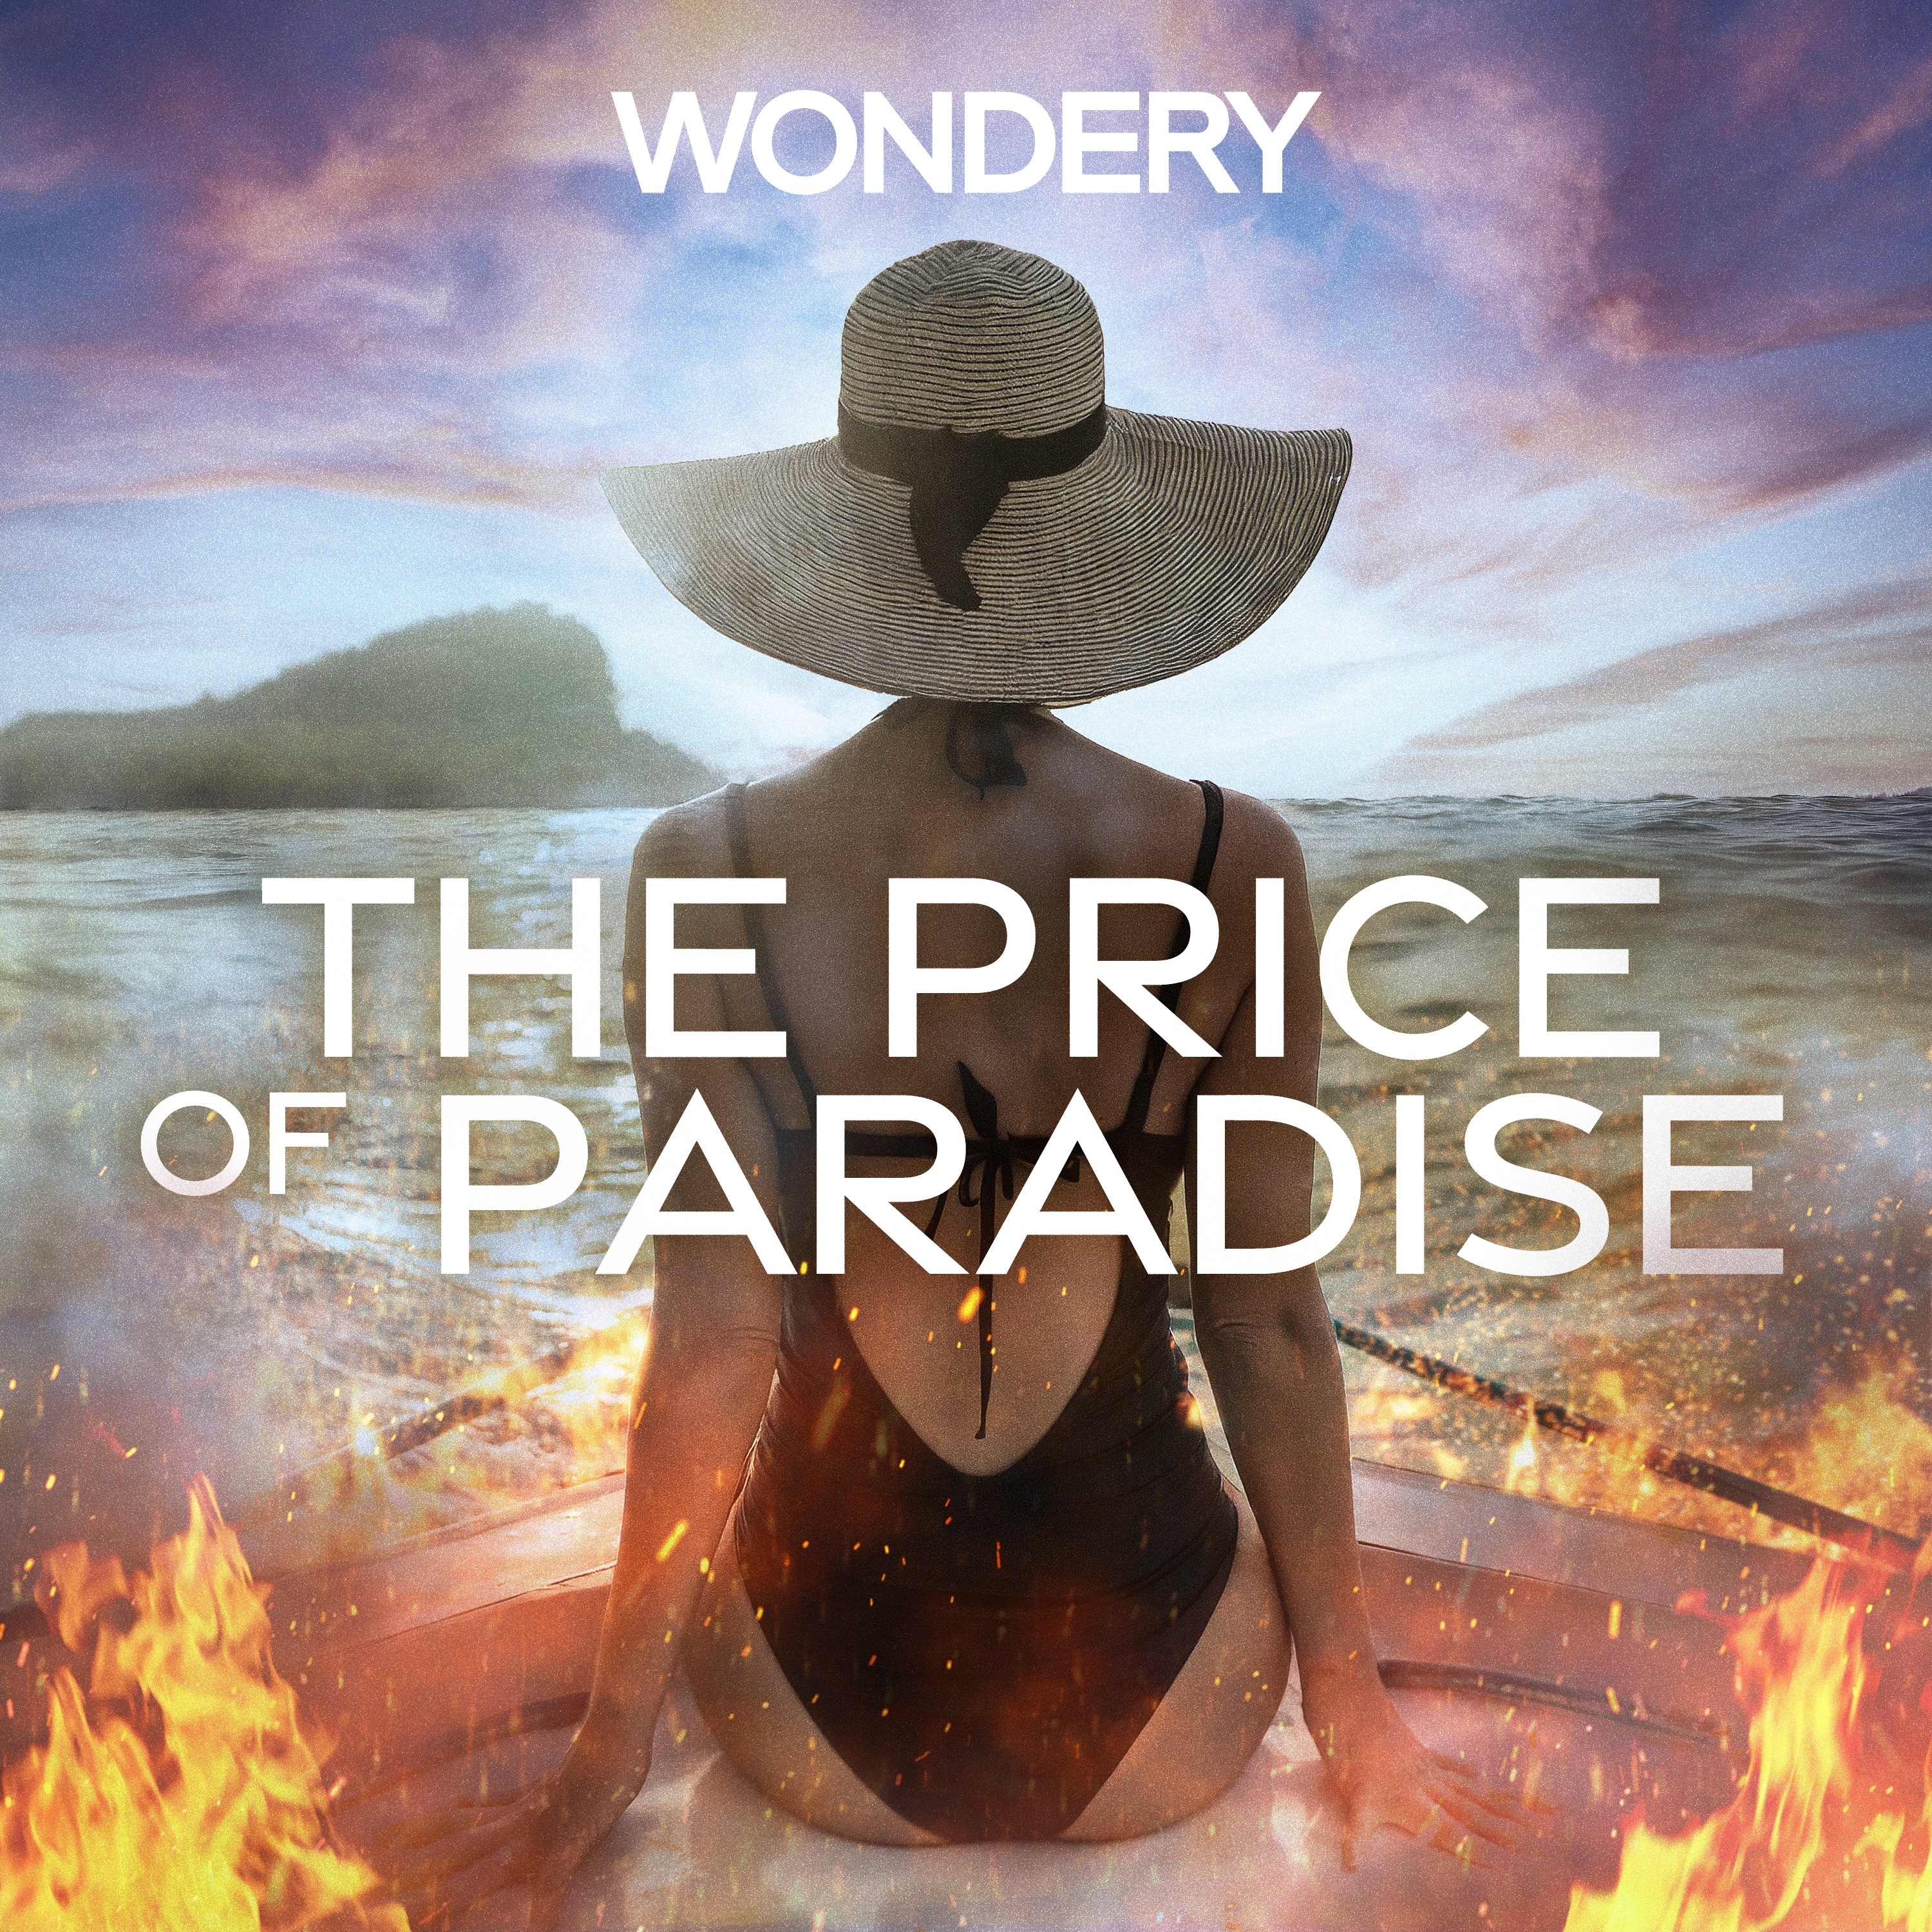 Listen Now: The Price of Paradise by Wondery